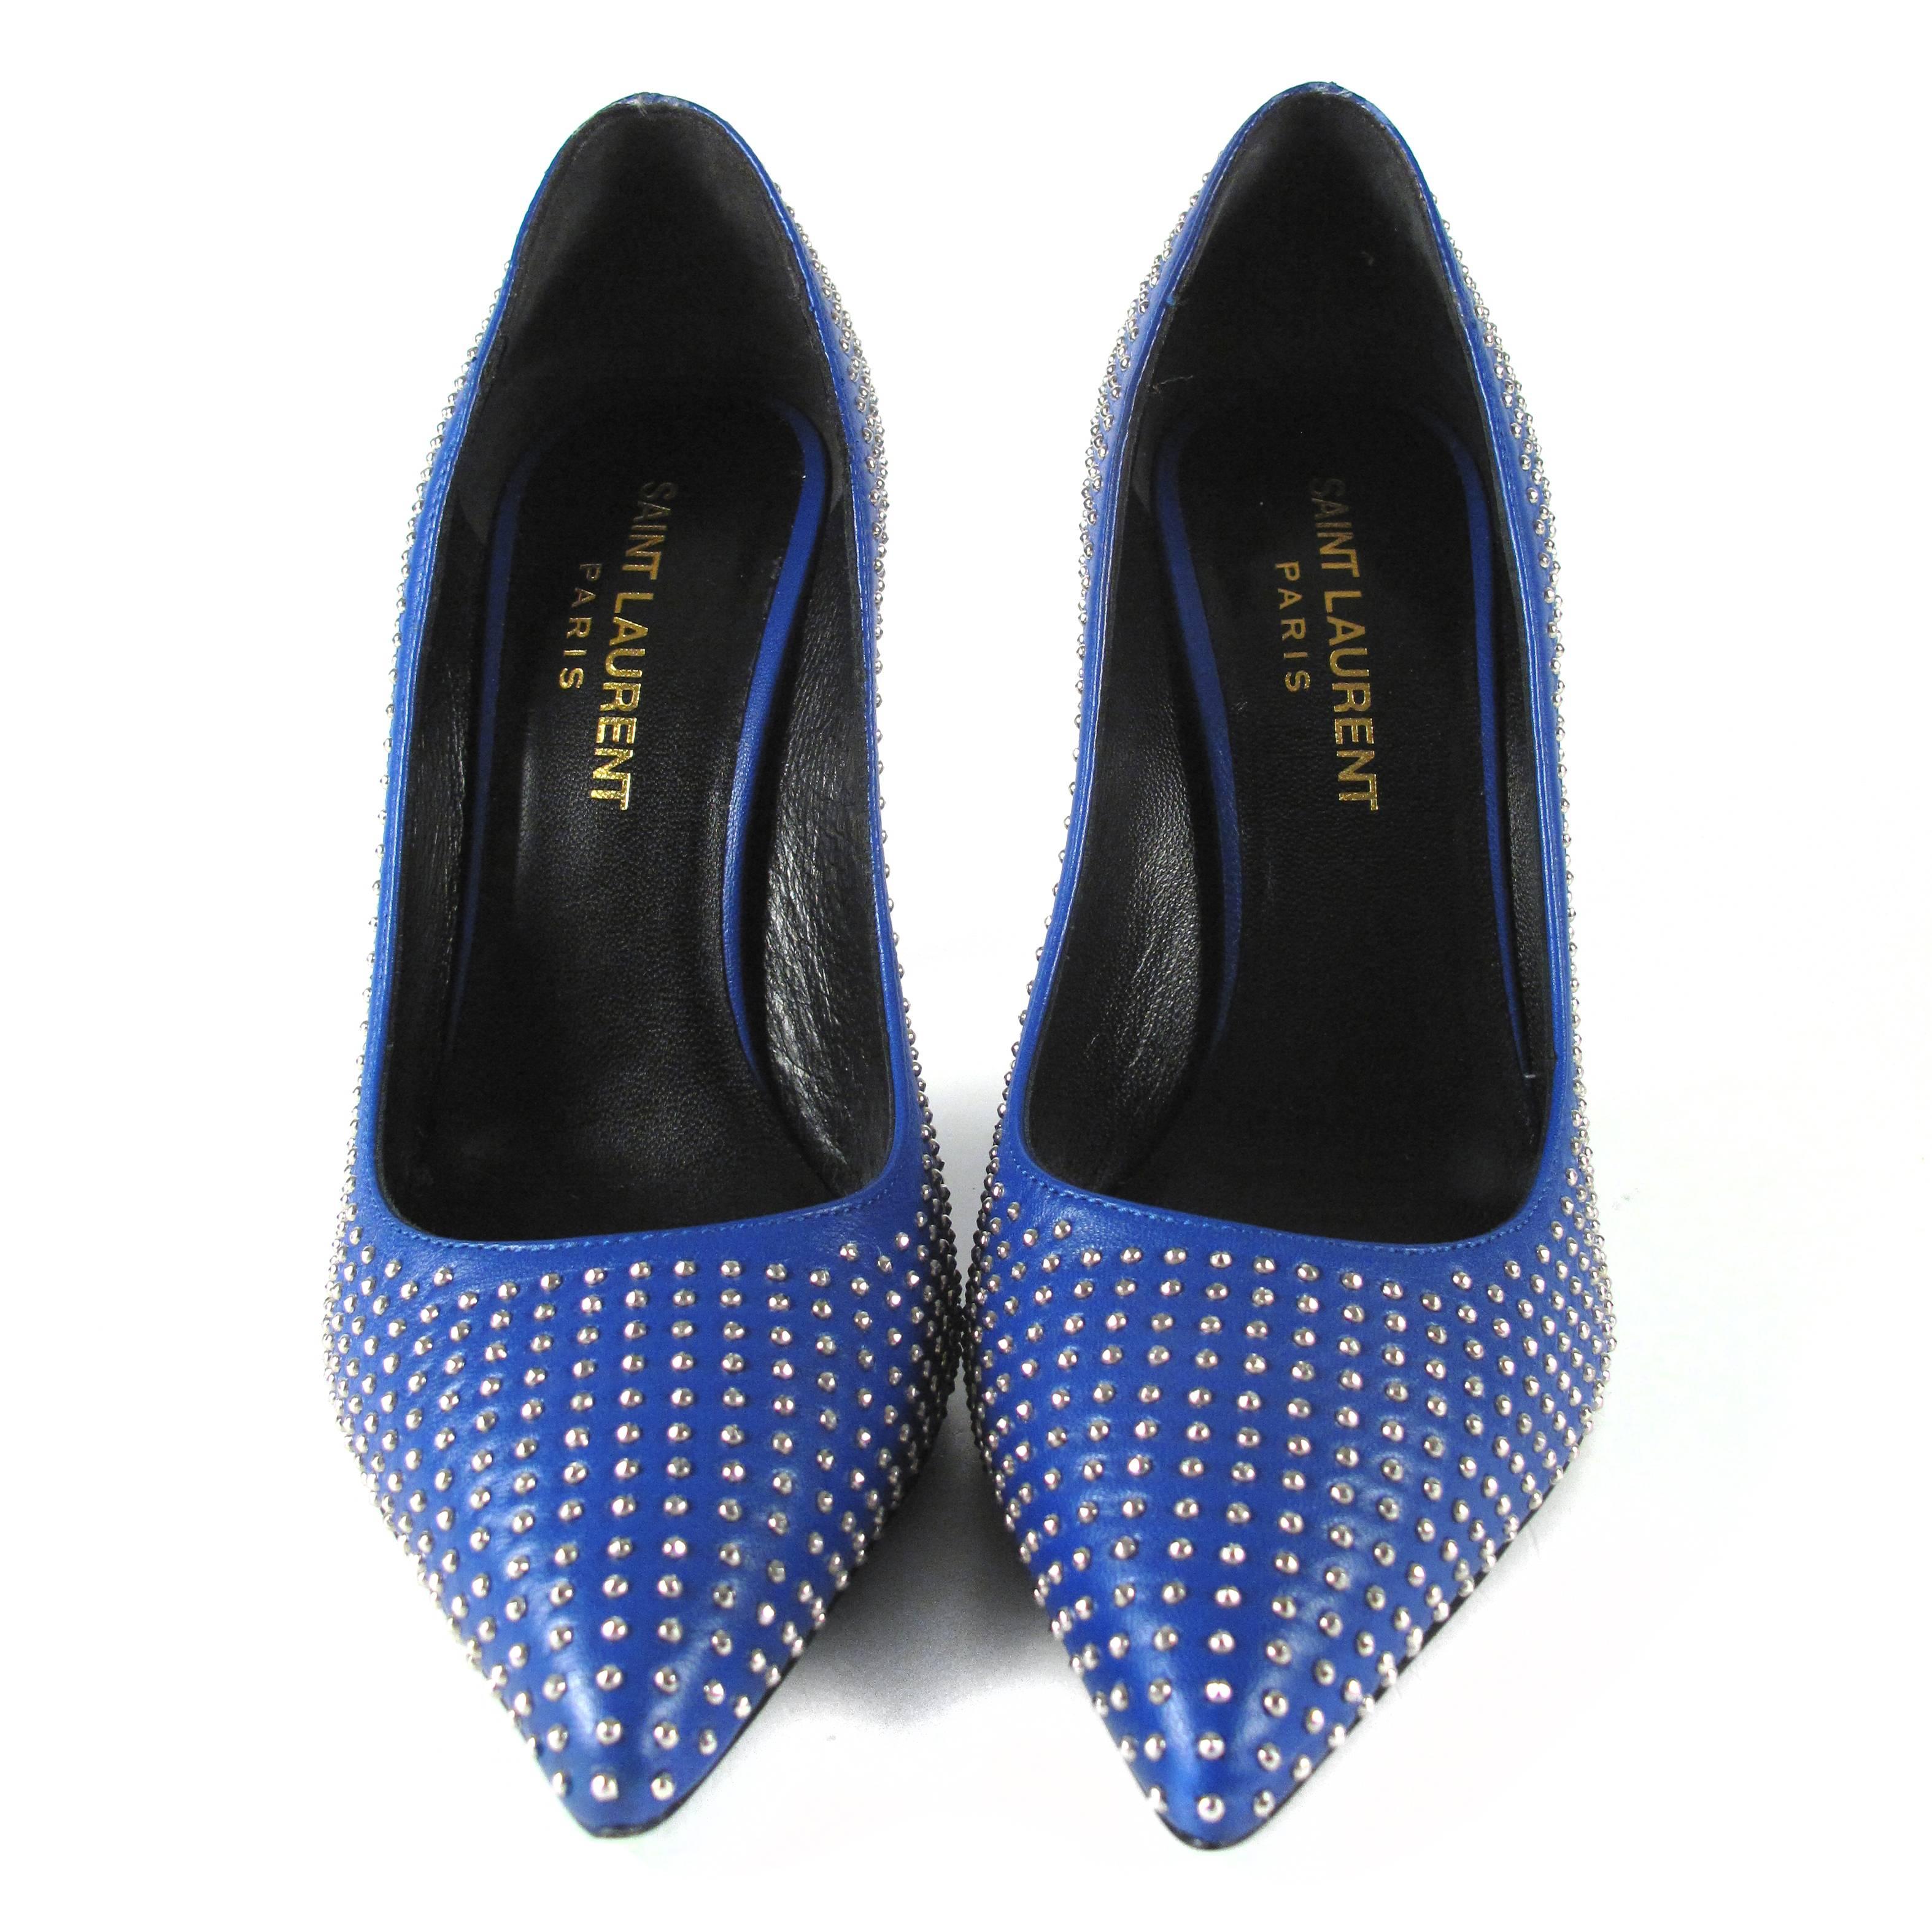 Saint Laurent - Studded Heels

Size: US 5 - 35

Color: Blue

Material: Leather

------------------------------------------------------------

Details:

- silver tone hardware

- studded throughout

- pointed toes

- includes